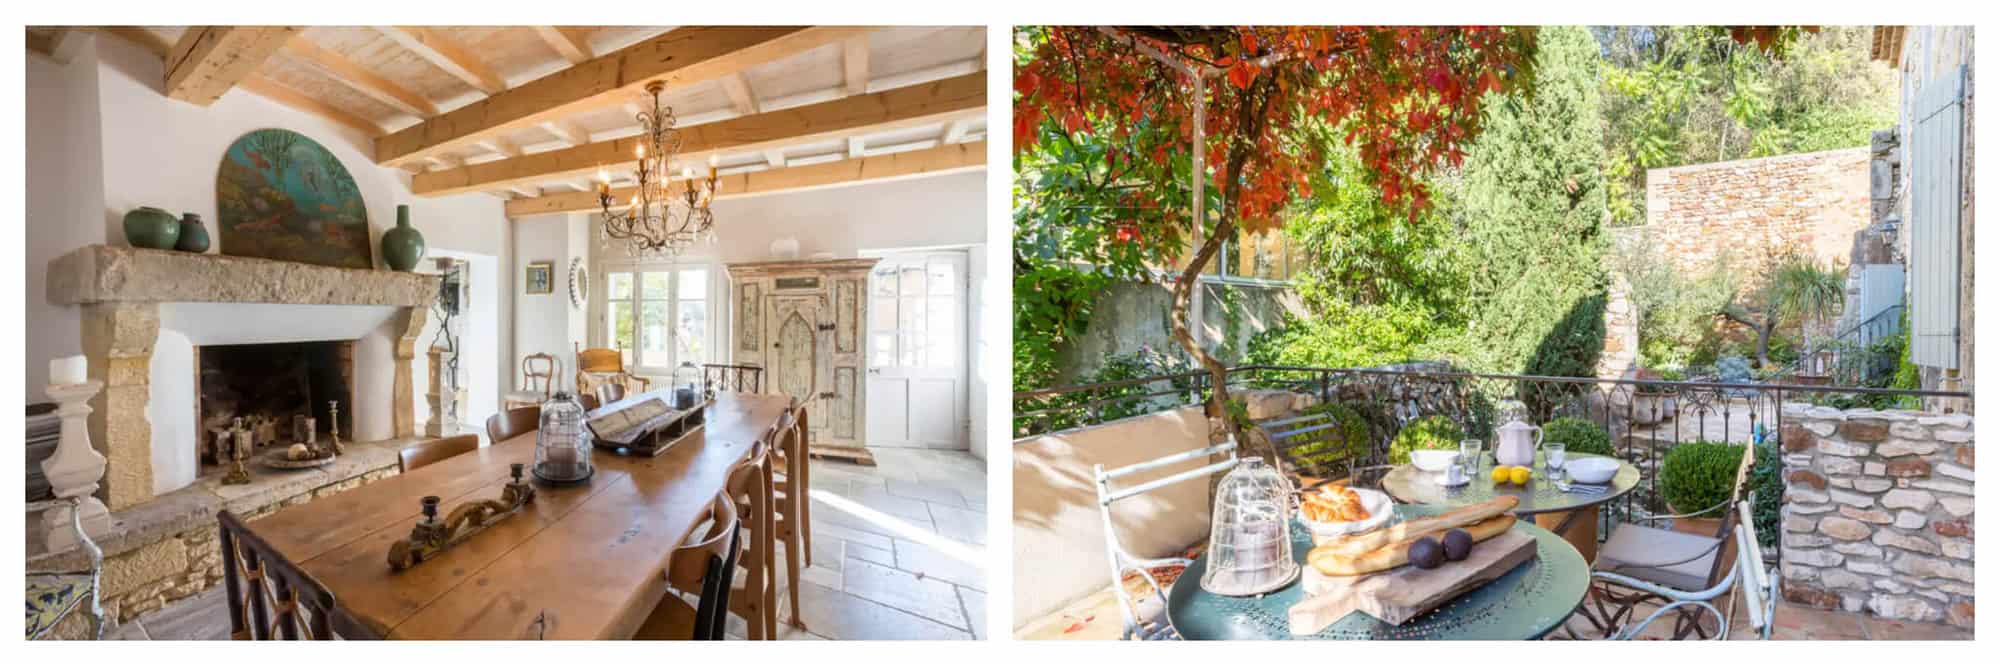 A light and airy dining room at Here Comes the Sun has a large table and beams with a vintage candelabra above. The shaded terrace has a table ready for lunch with bread and fruit.